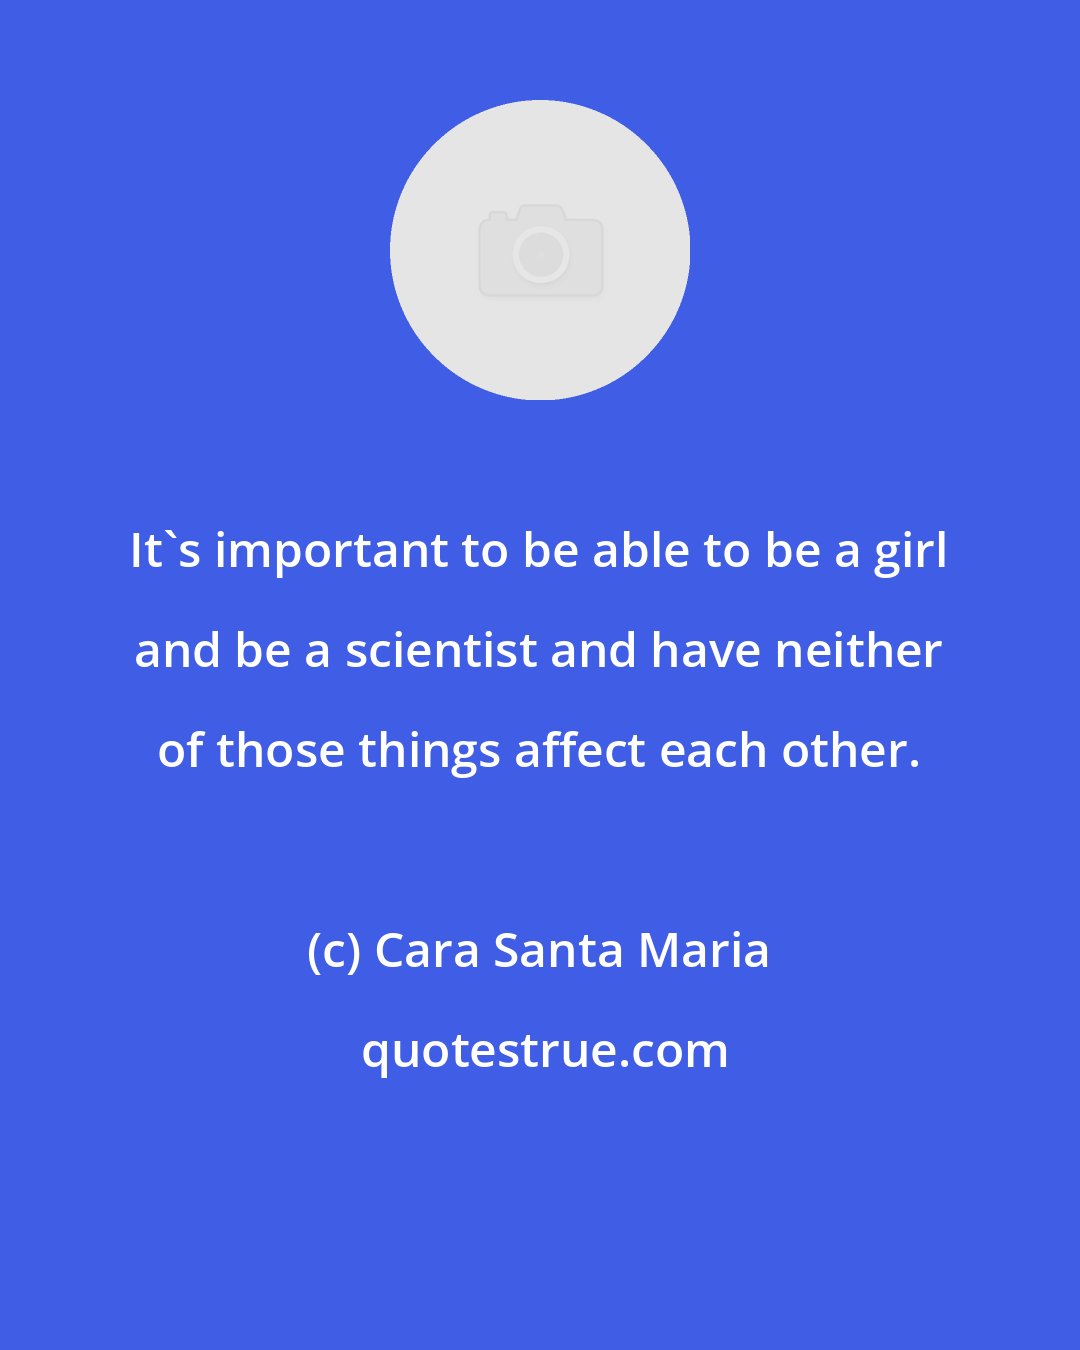 Cara Santa Maria: It's important to be able to be a girl and be a scientist and have neither of those things affect each other.